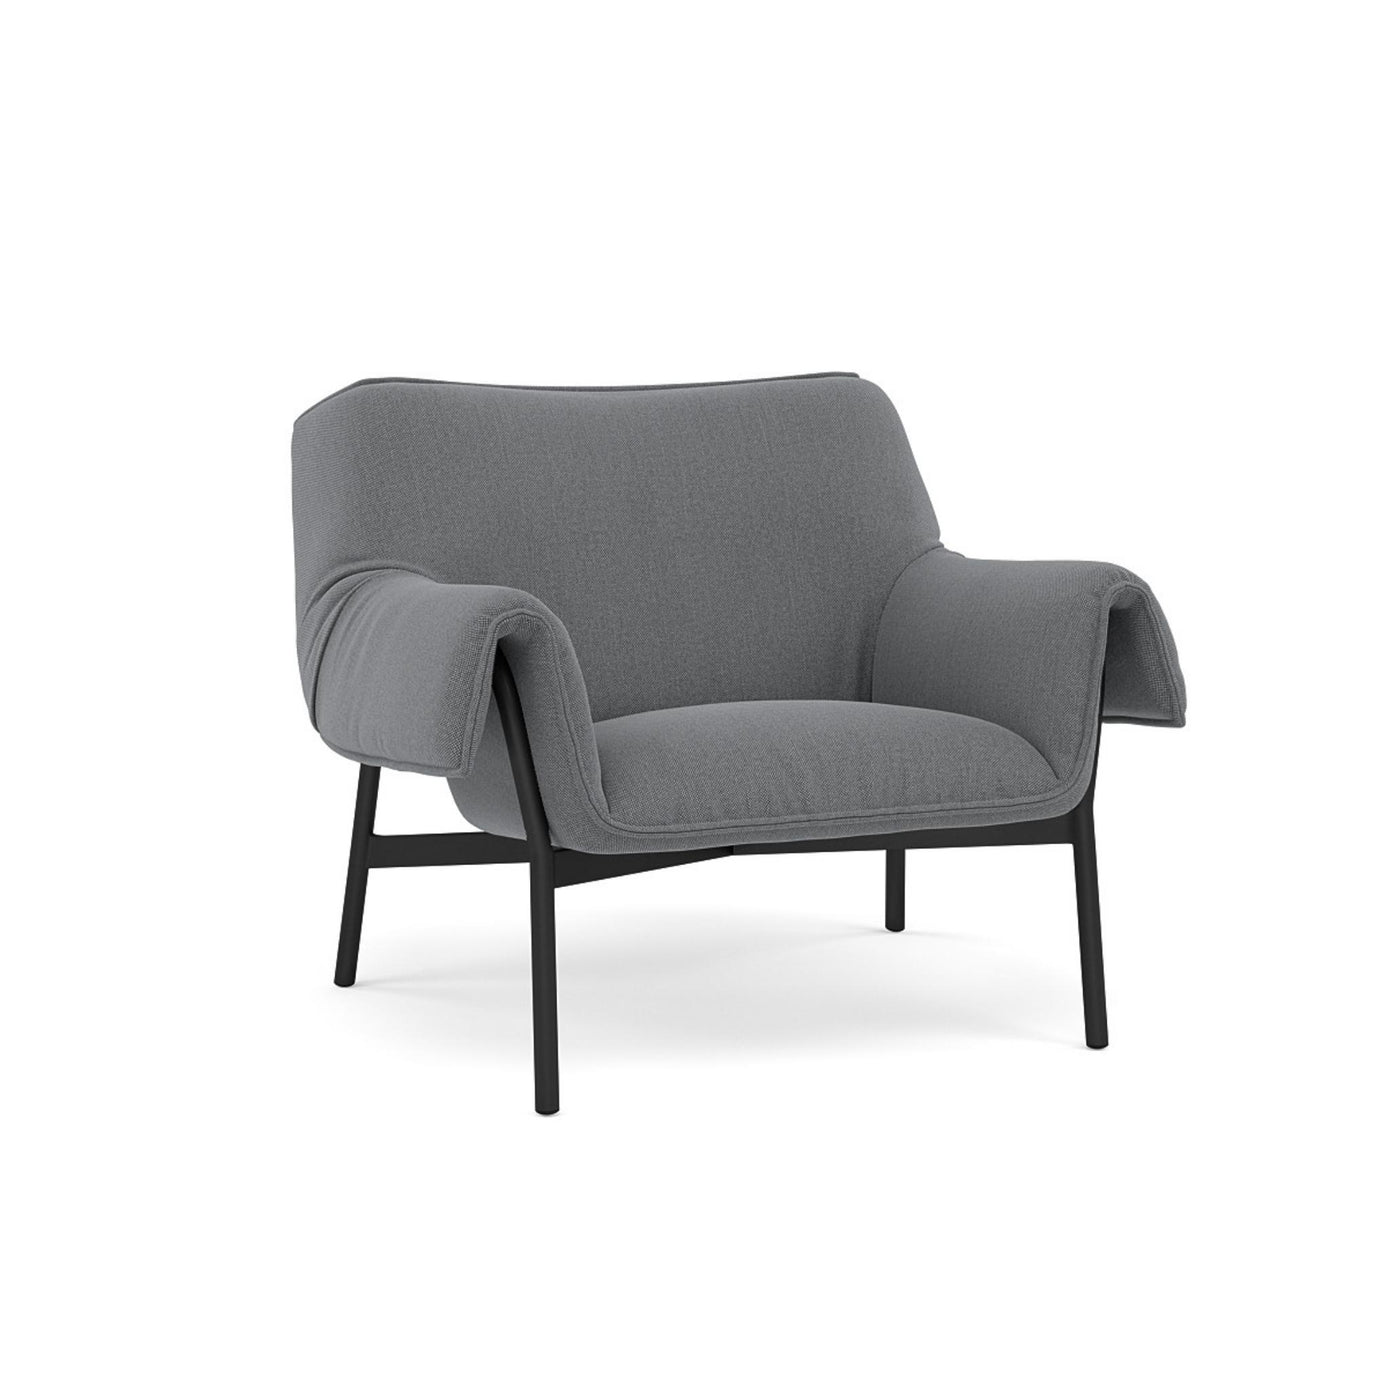 Muuto Wrap Lounge Chair. Made to order from someday designs. #colour_re-wool-158